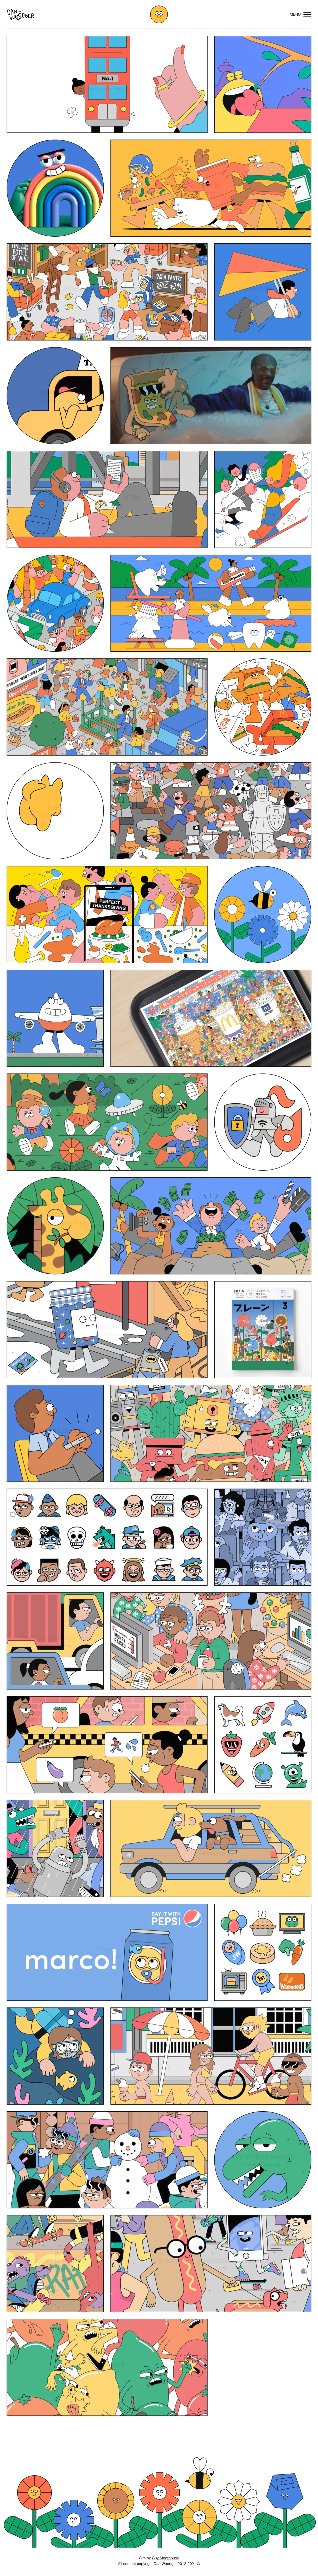 Dan Woodger Landing Page Example: Dan Woodger is an illustrator living in London. He creates playful, colourful work for clients including Google, Pepsi and The New York Times.